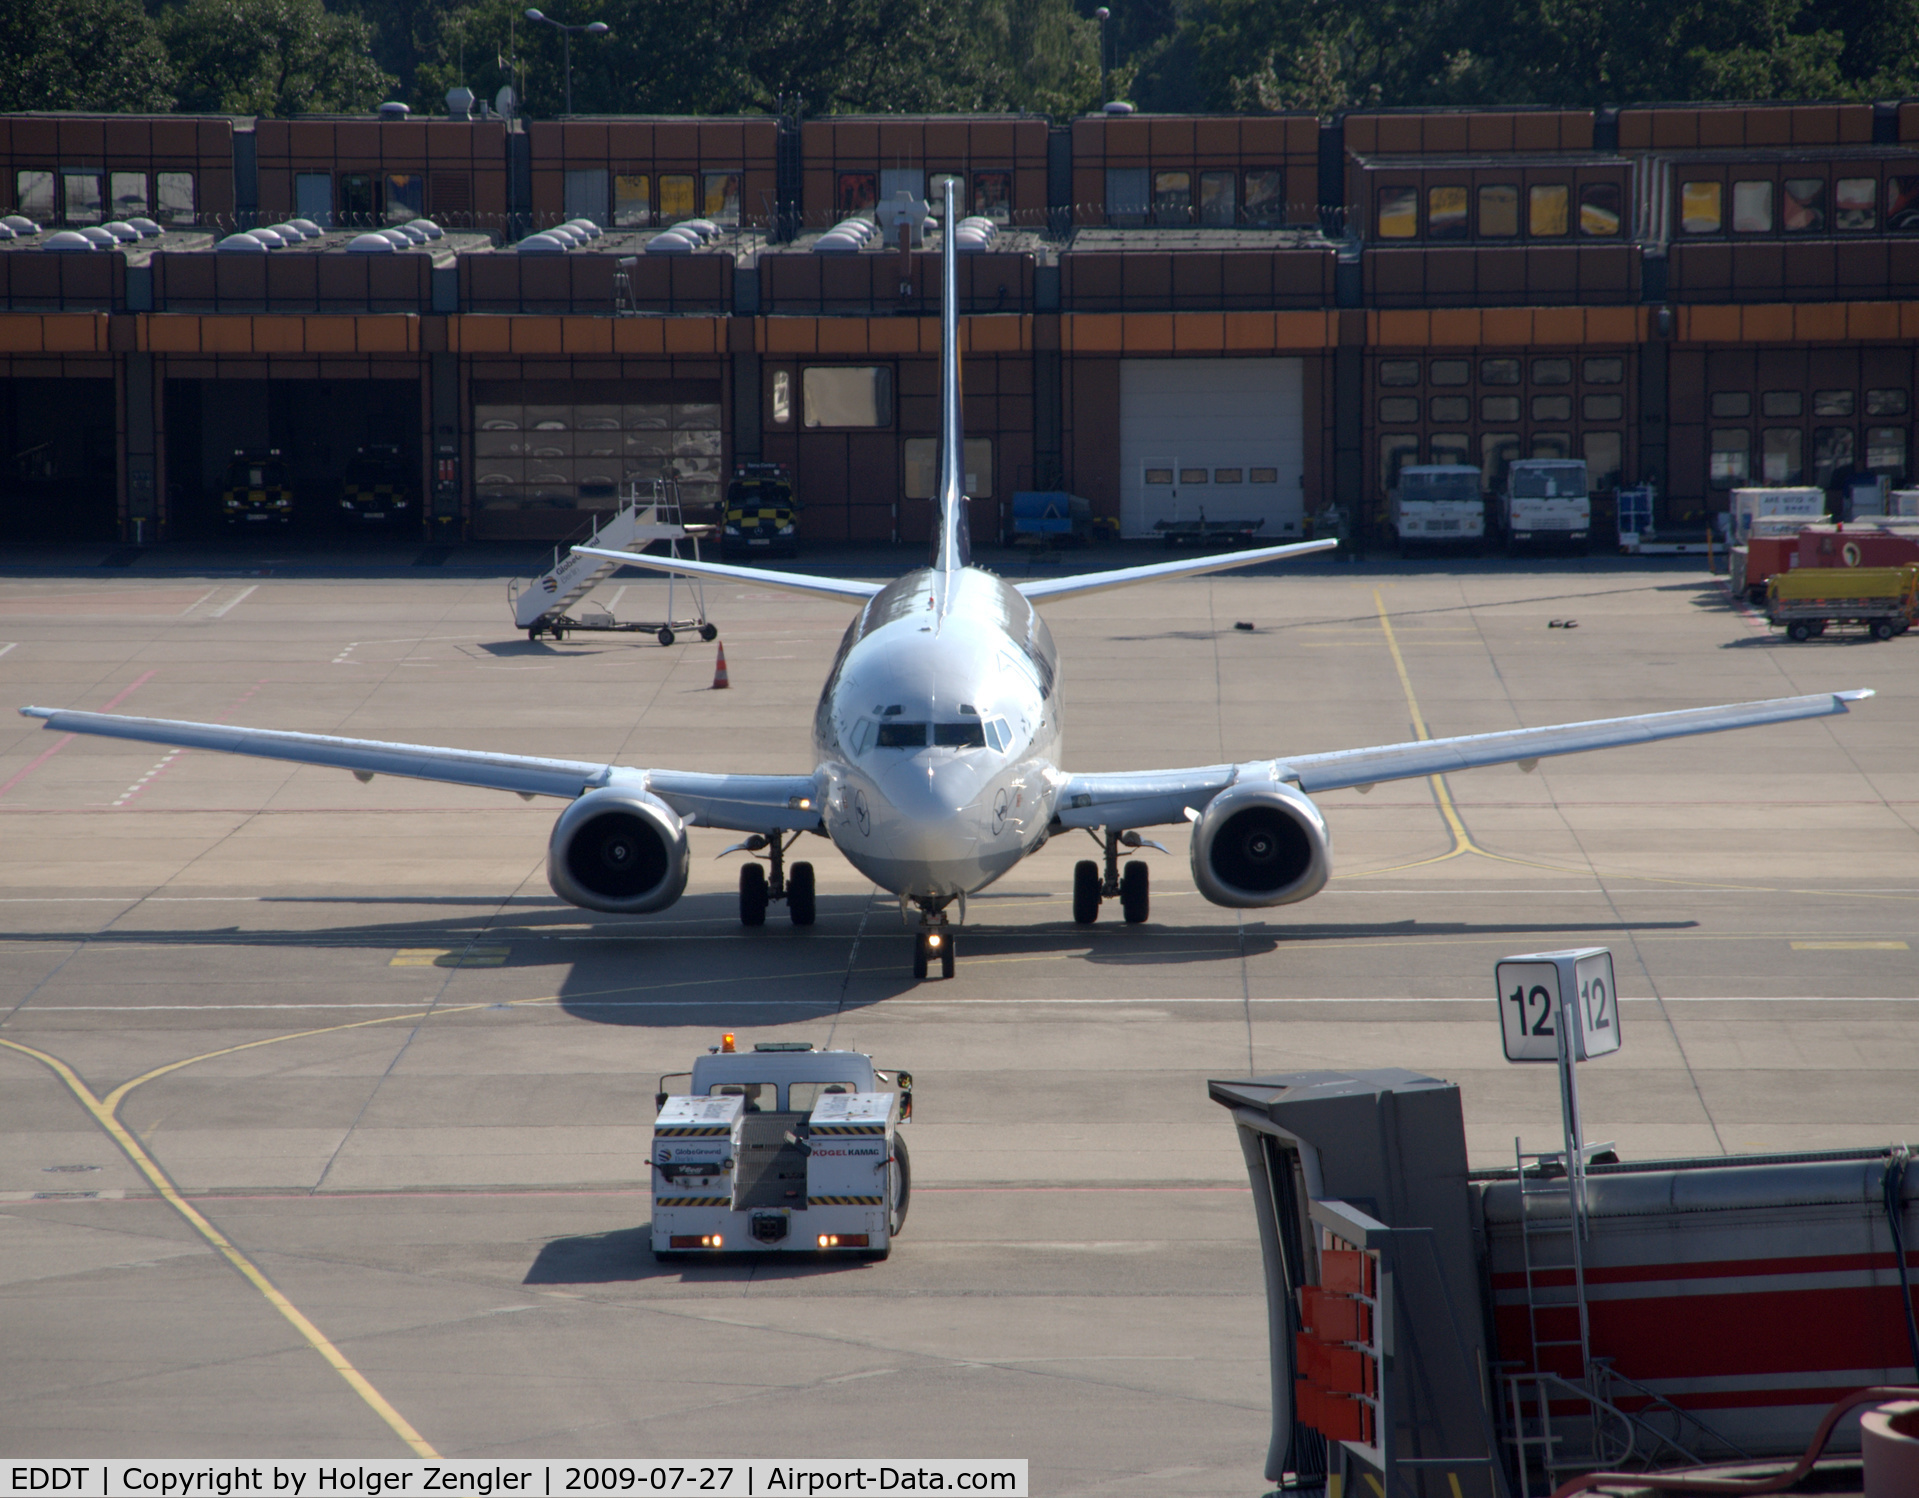 Tegel International Airport (closing in 2011), Berlin Germany (EDDT) - Show down at gate no. 12